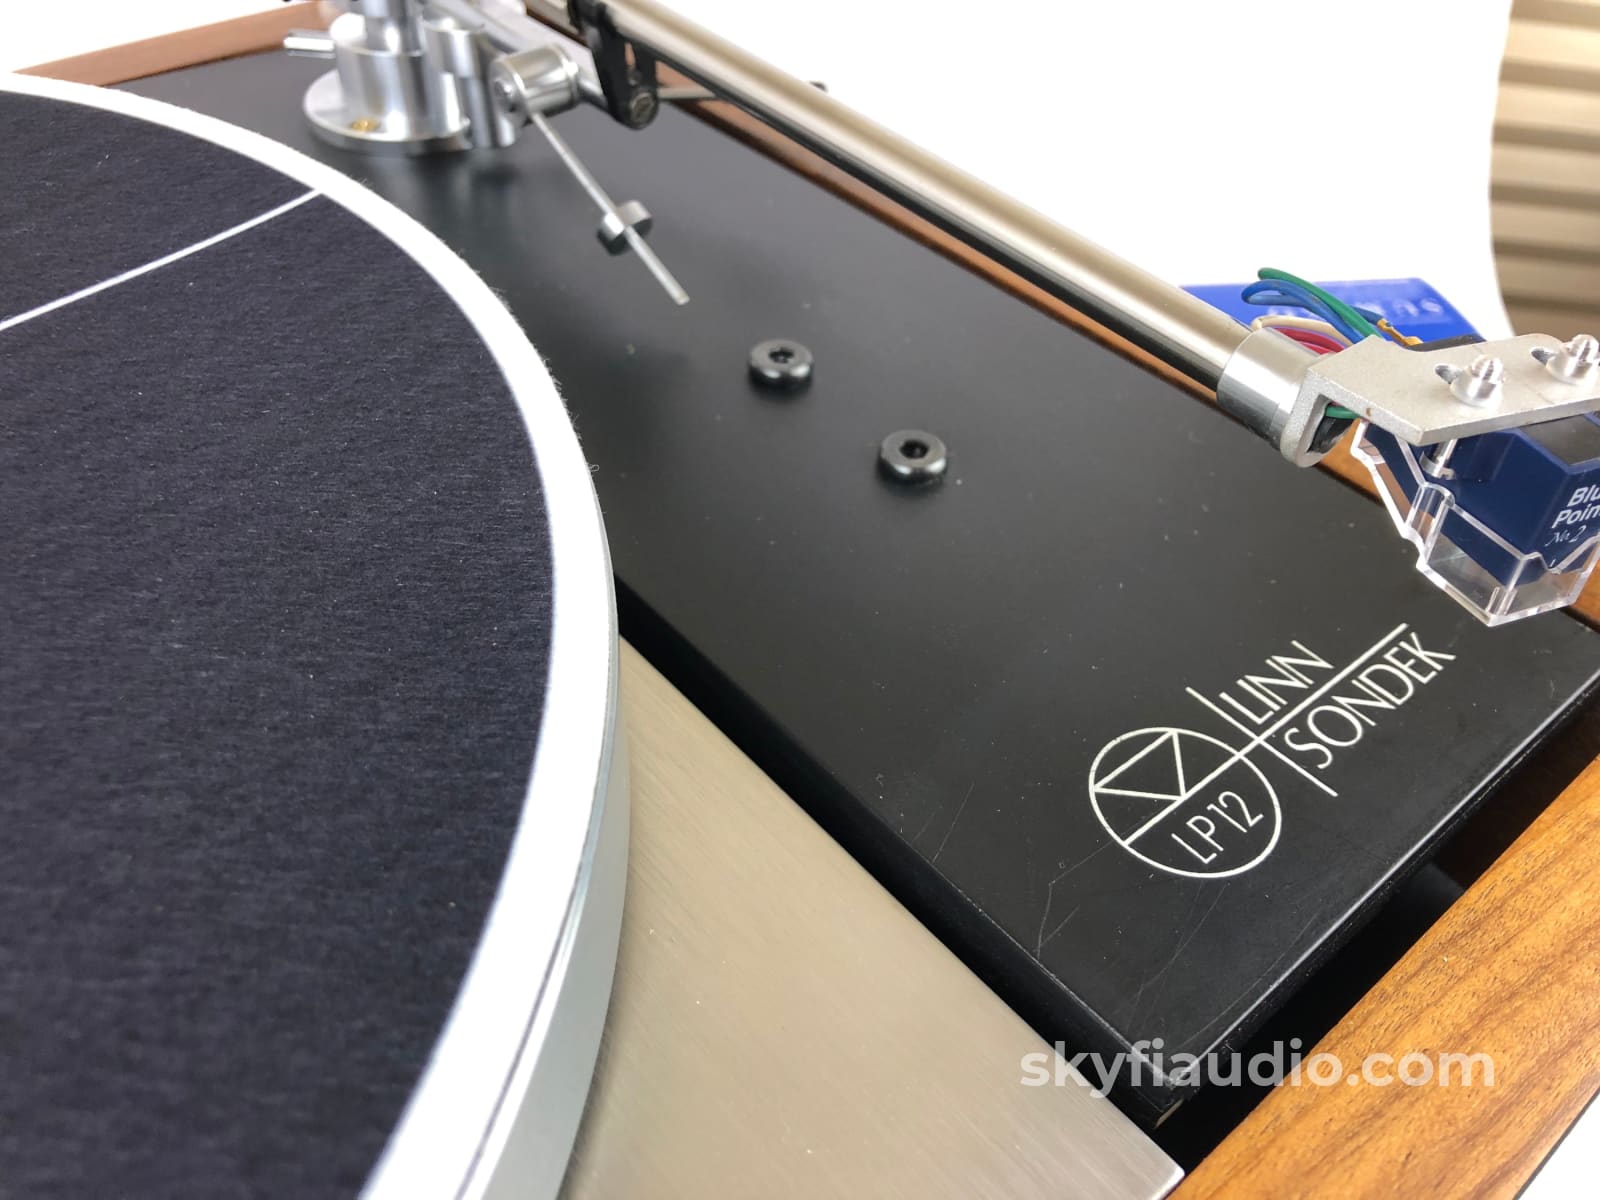 Linn Lp12 Classic Turntable With Luxman Tonearm And New Sumiko Cartridge